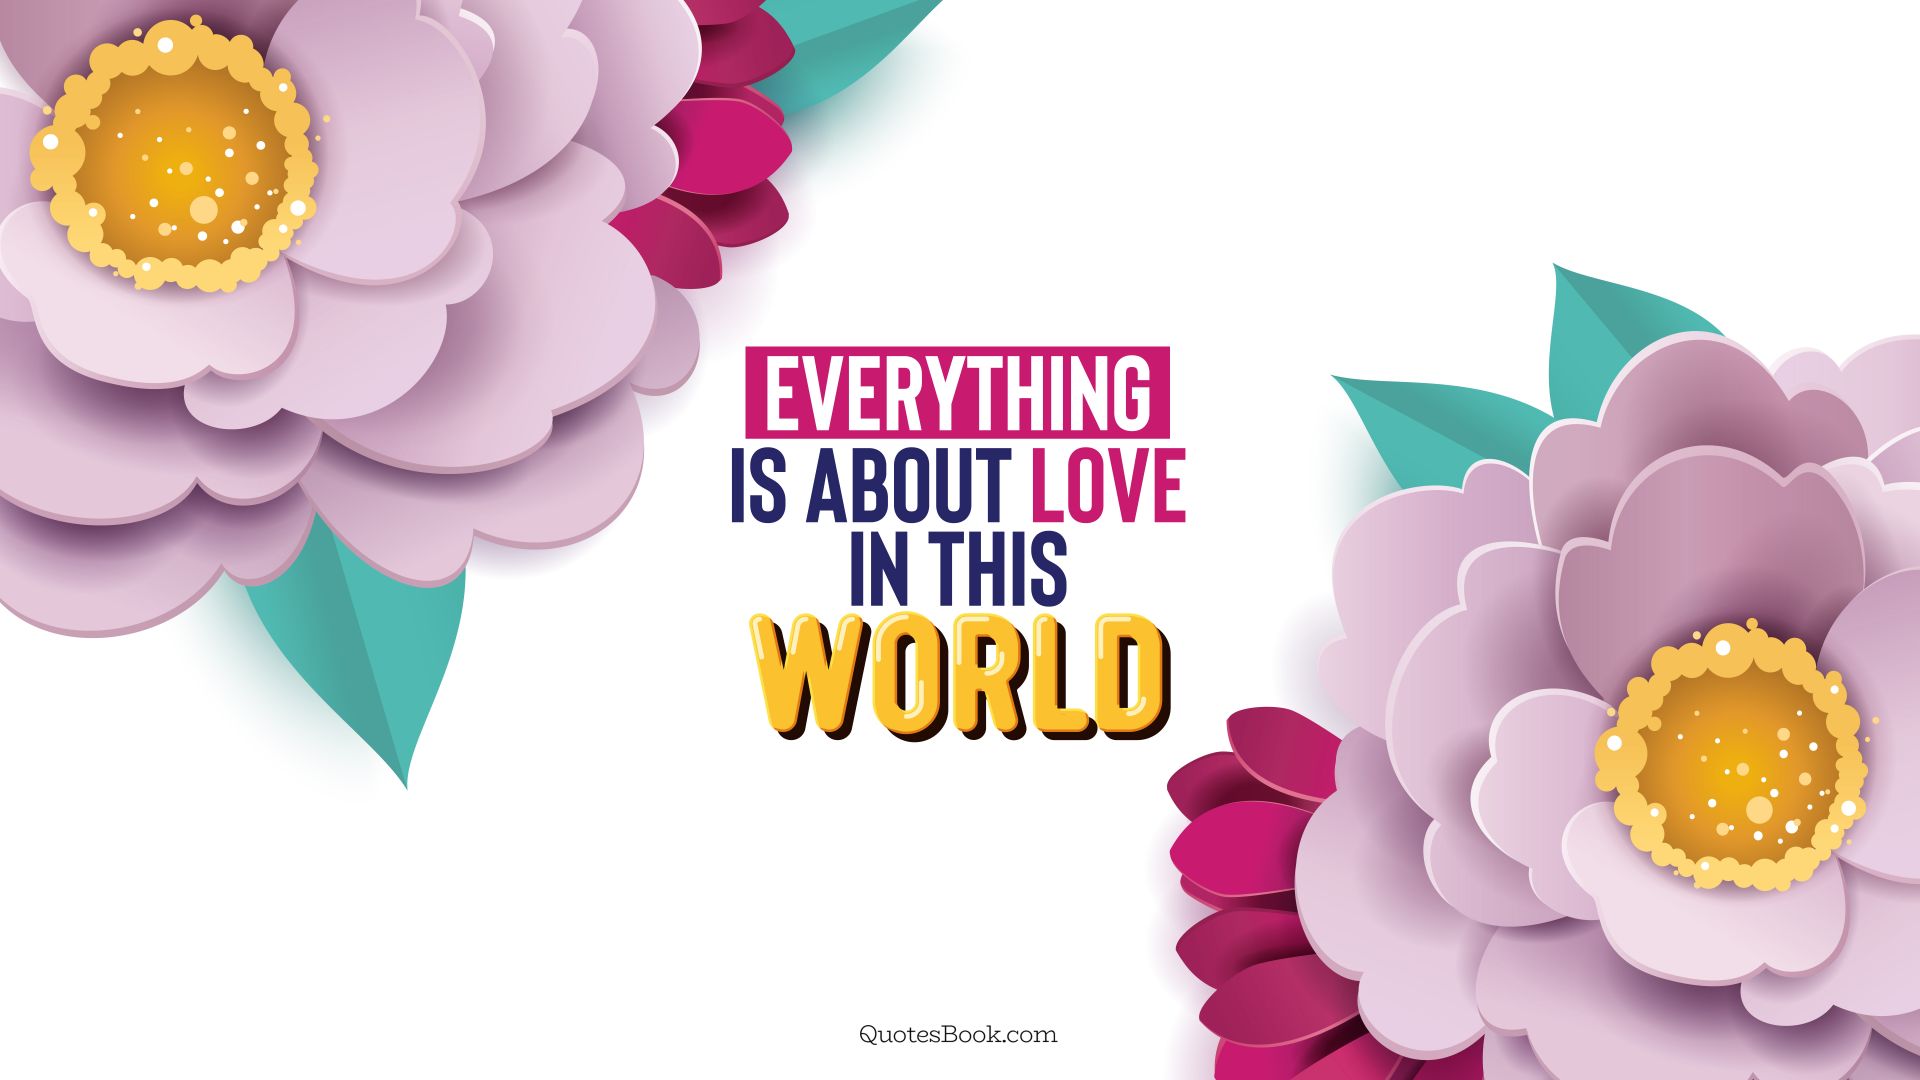 Everything is about love in this world. - Quote by QuotesBook